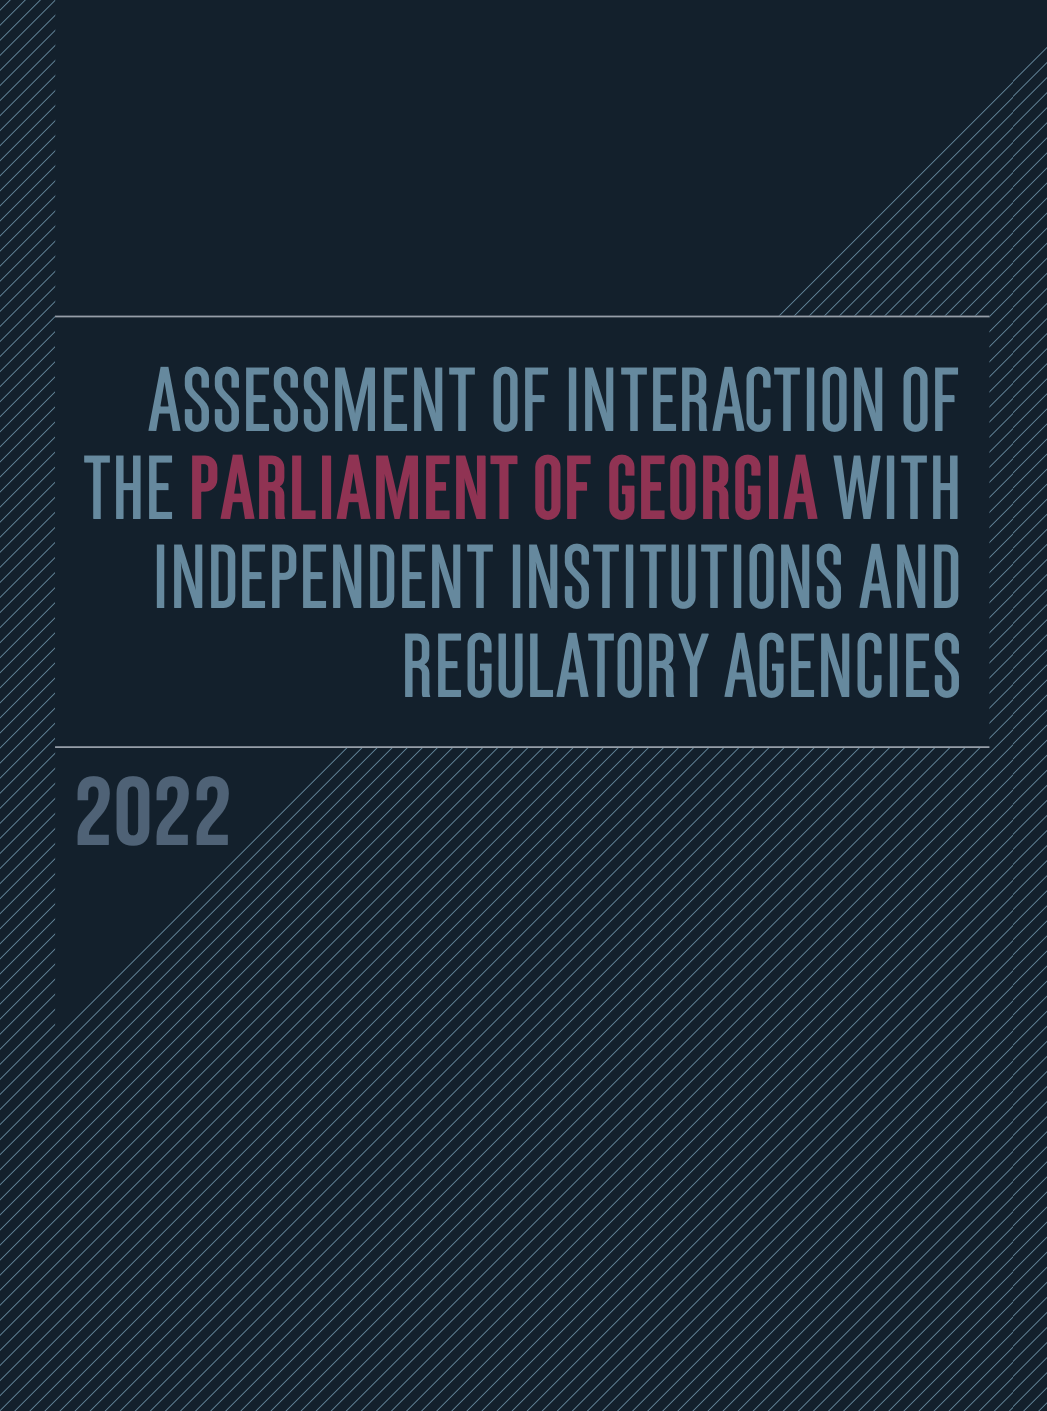 Georgian Parliament, Independent Institutions and Regulatory Agencies. 2022